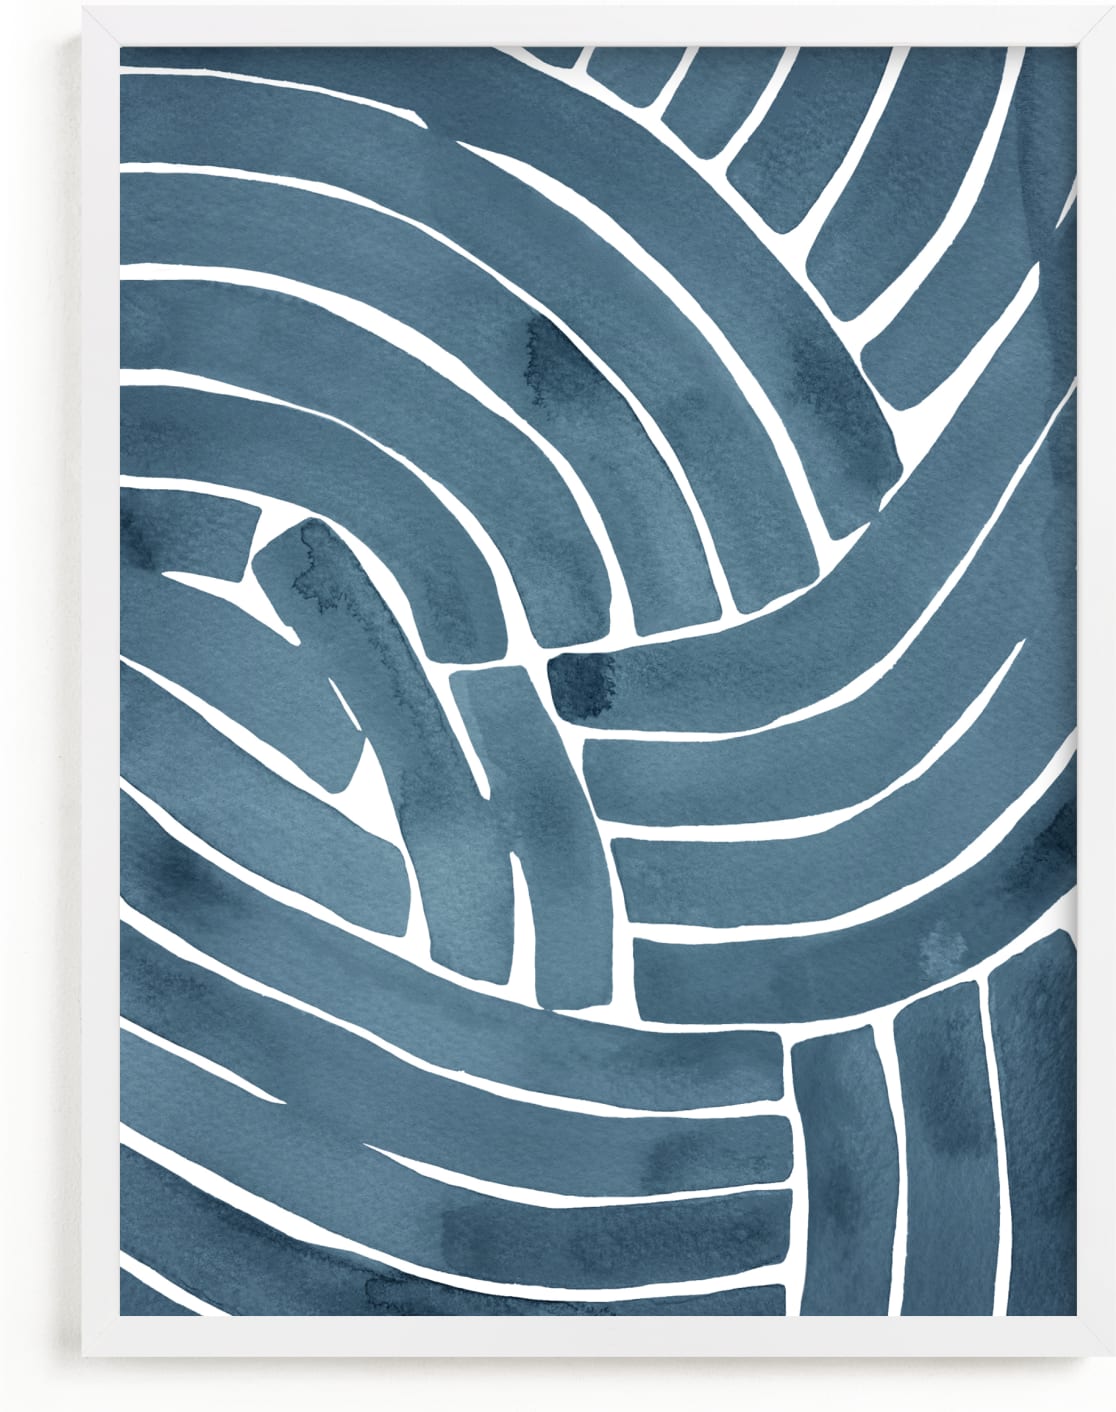 This is a blue art by Kristine Sarley called Curvy lines.